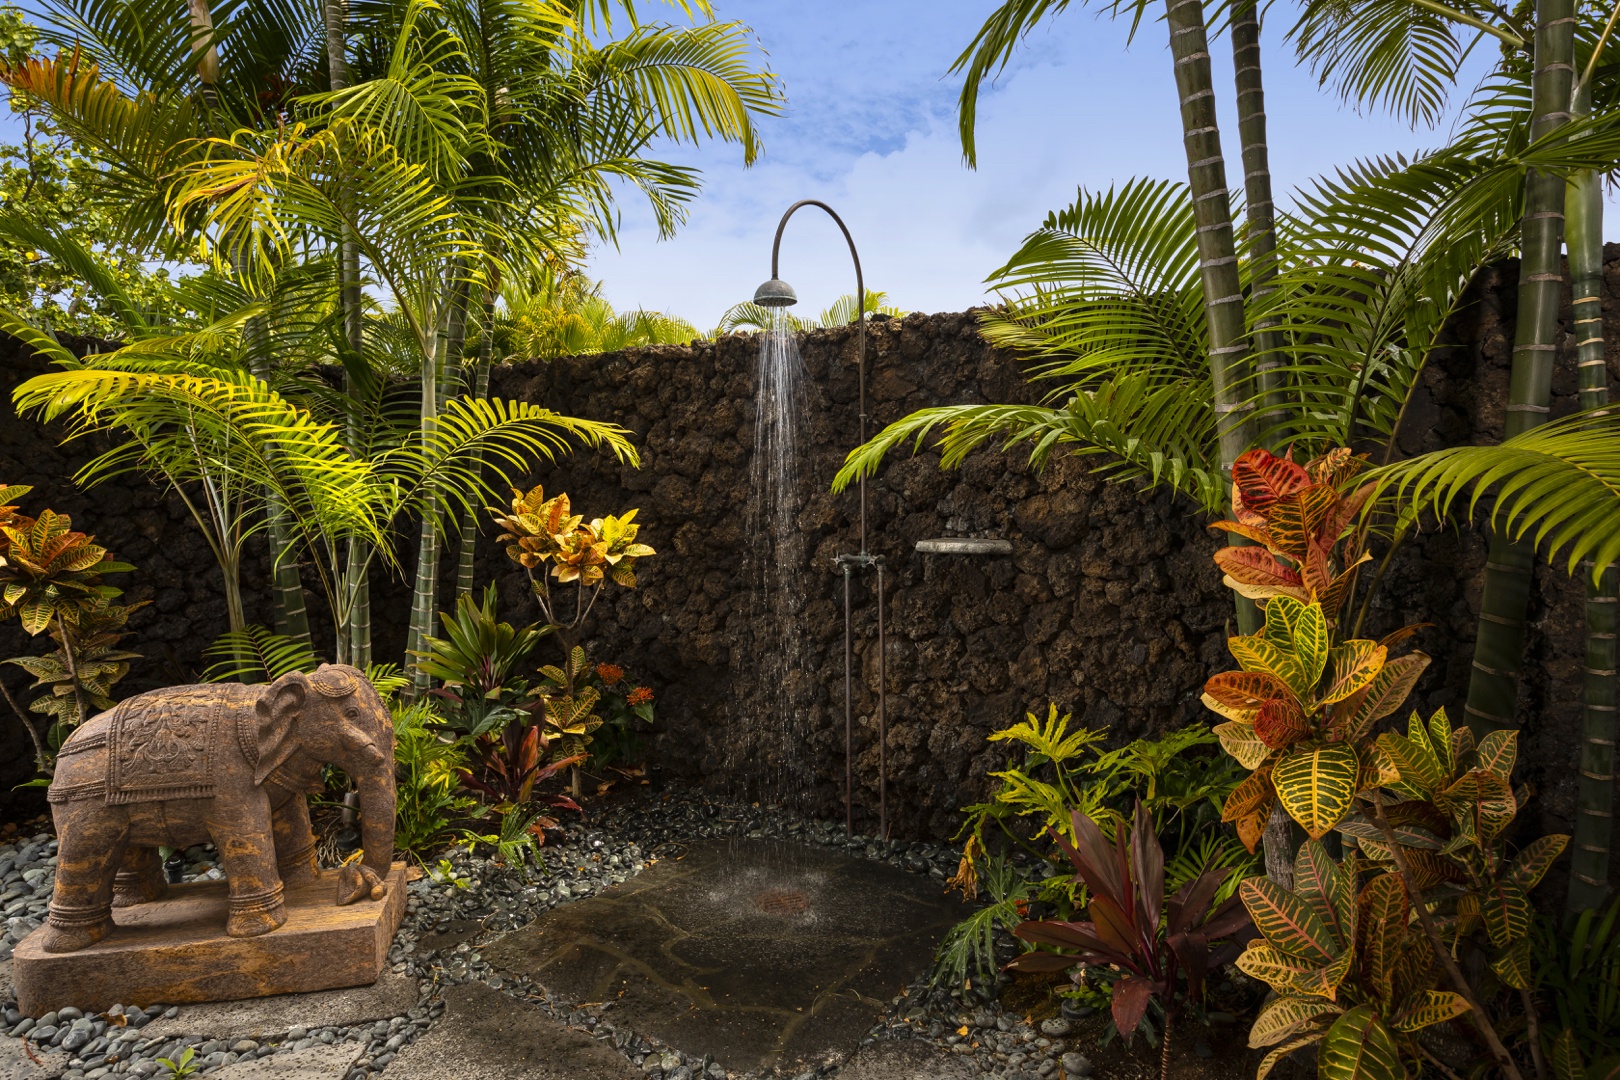 Kailua Kona Vacation Rentals, 4BD Kahikole Street (218) Estate Home at Four Seasons Resort at Hualalai - Fabulous garden shower exclusive to the primary suite with lush tropical landscaping